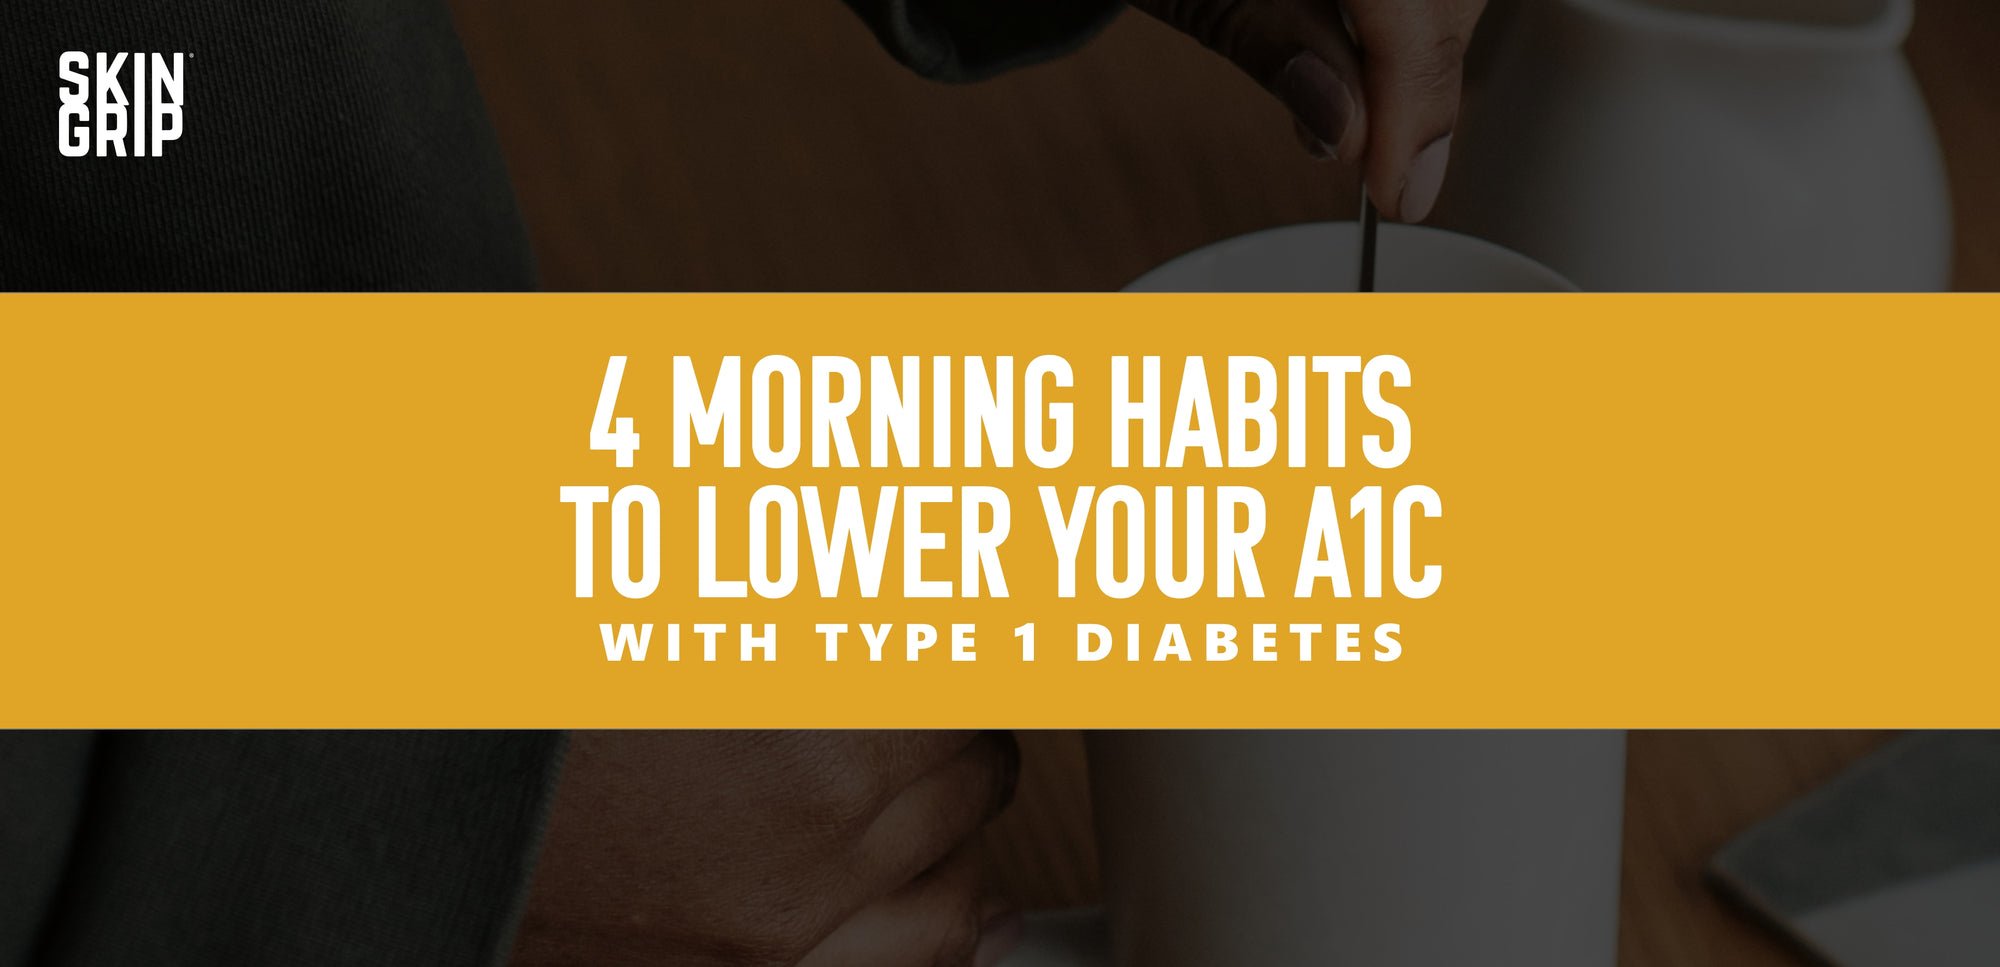 4 Morning Habits to Lower Your A1C with Type 1 Diabetes